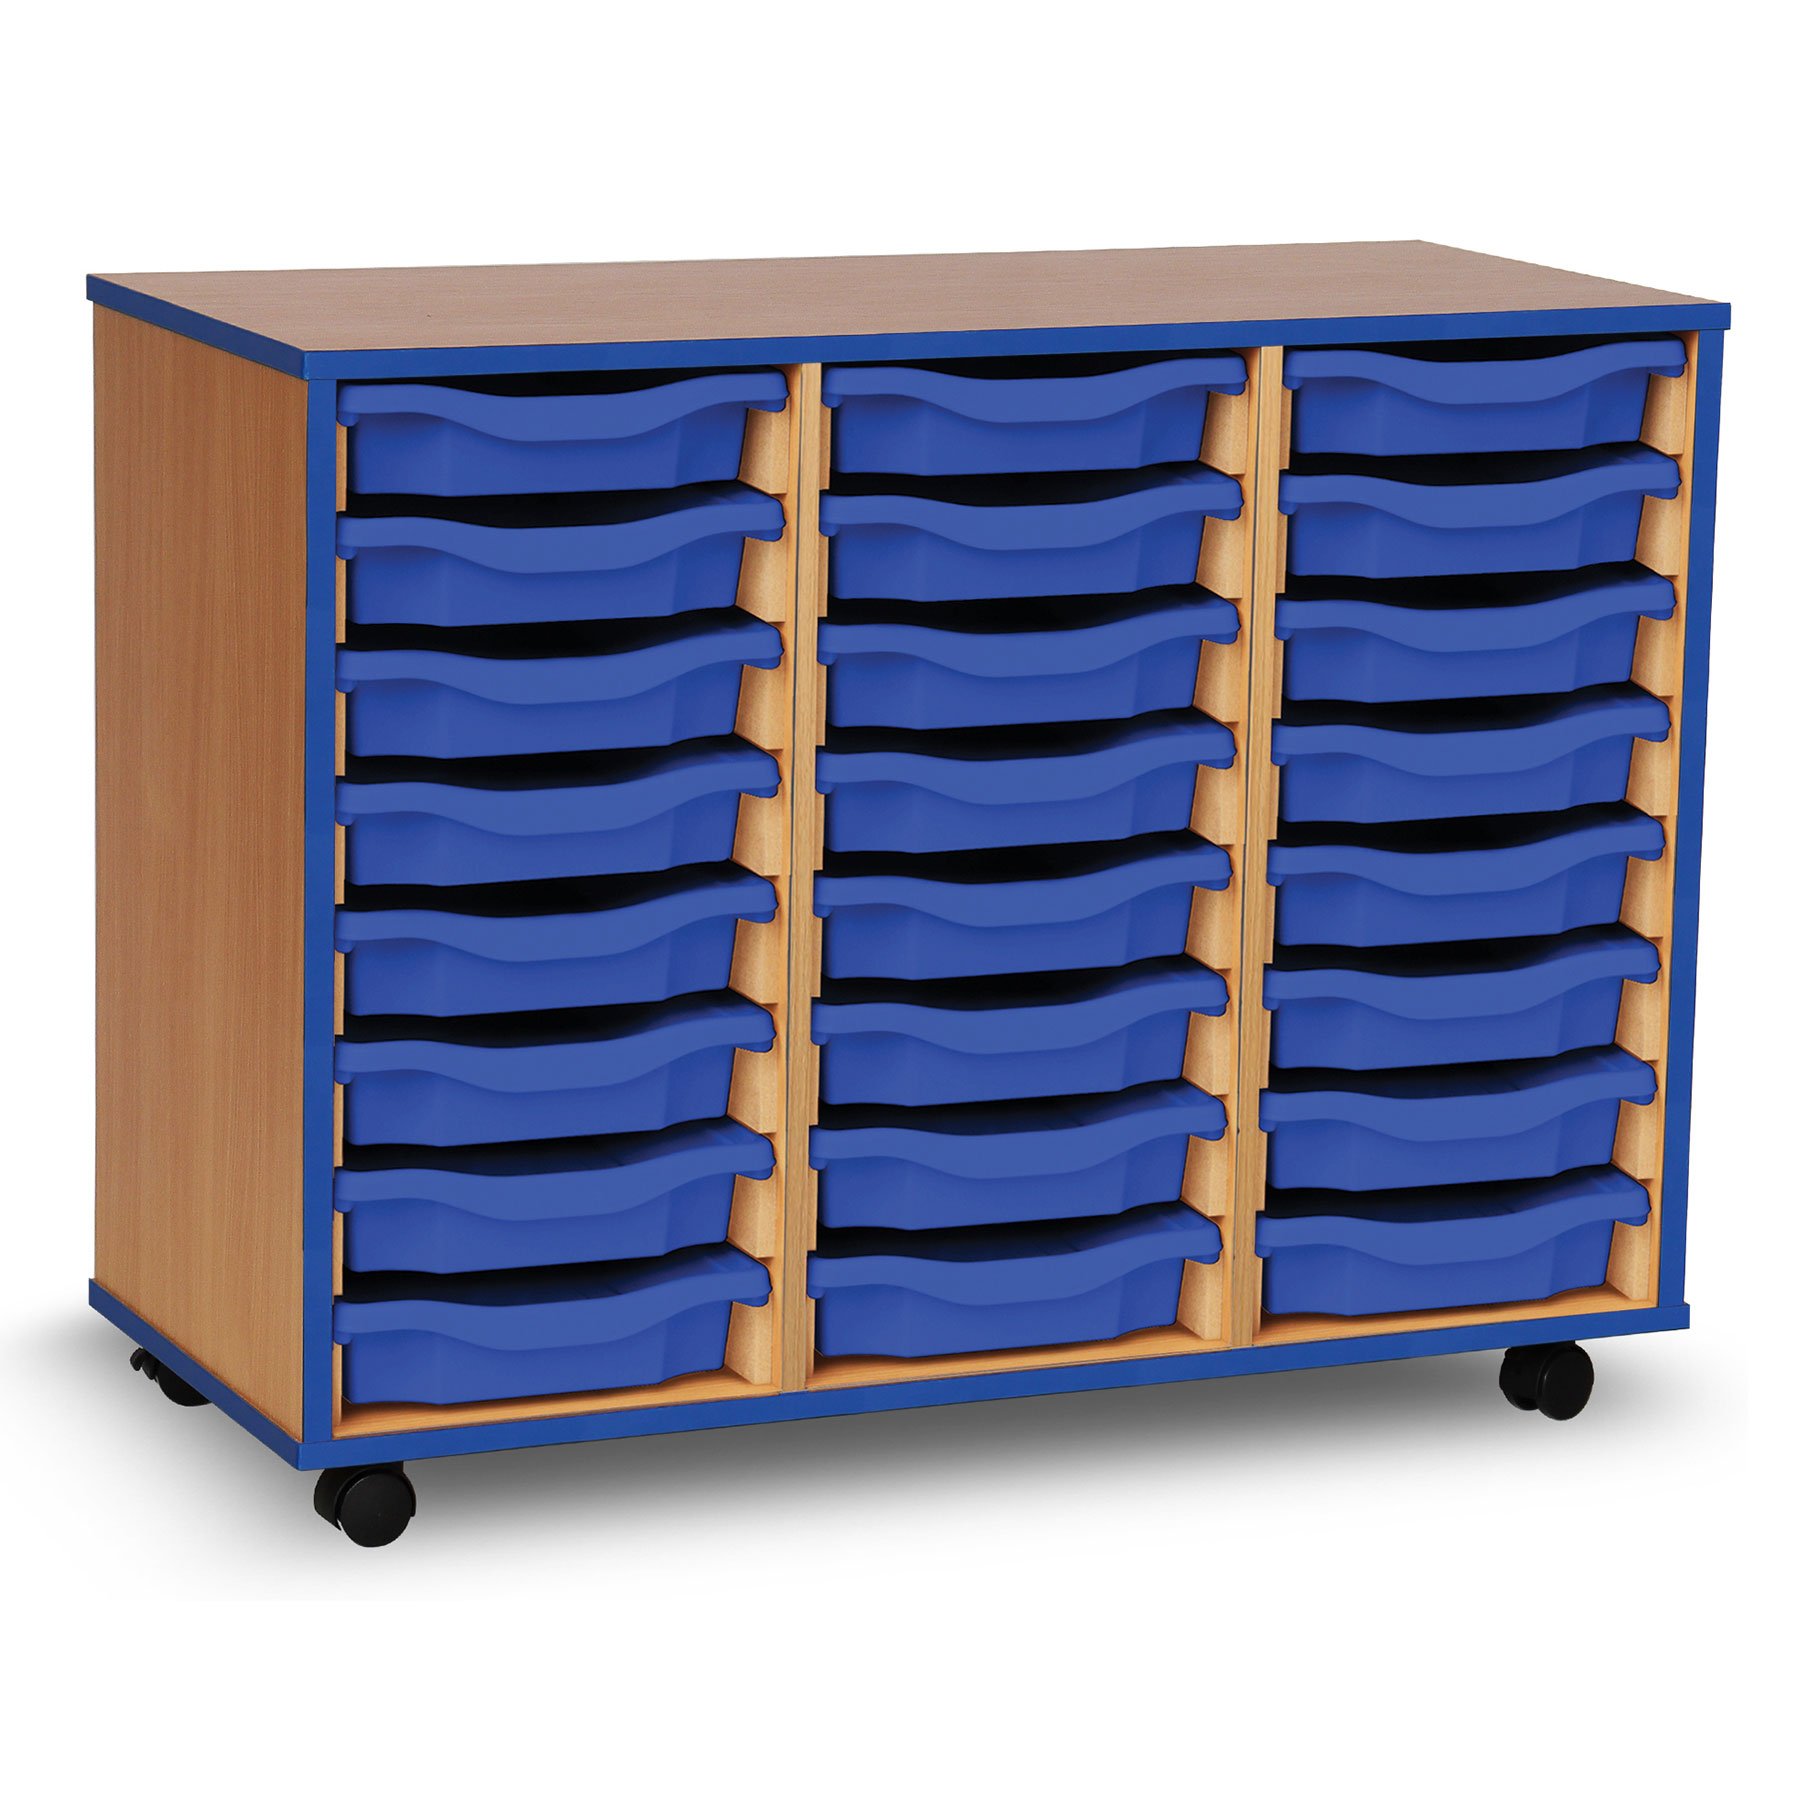 24 Single Tray Unit with Blue Edging, Castors & Blue Trays